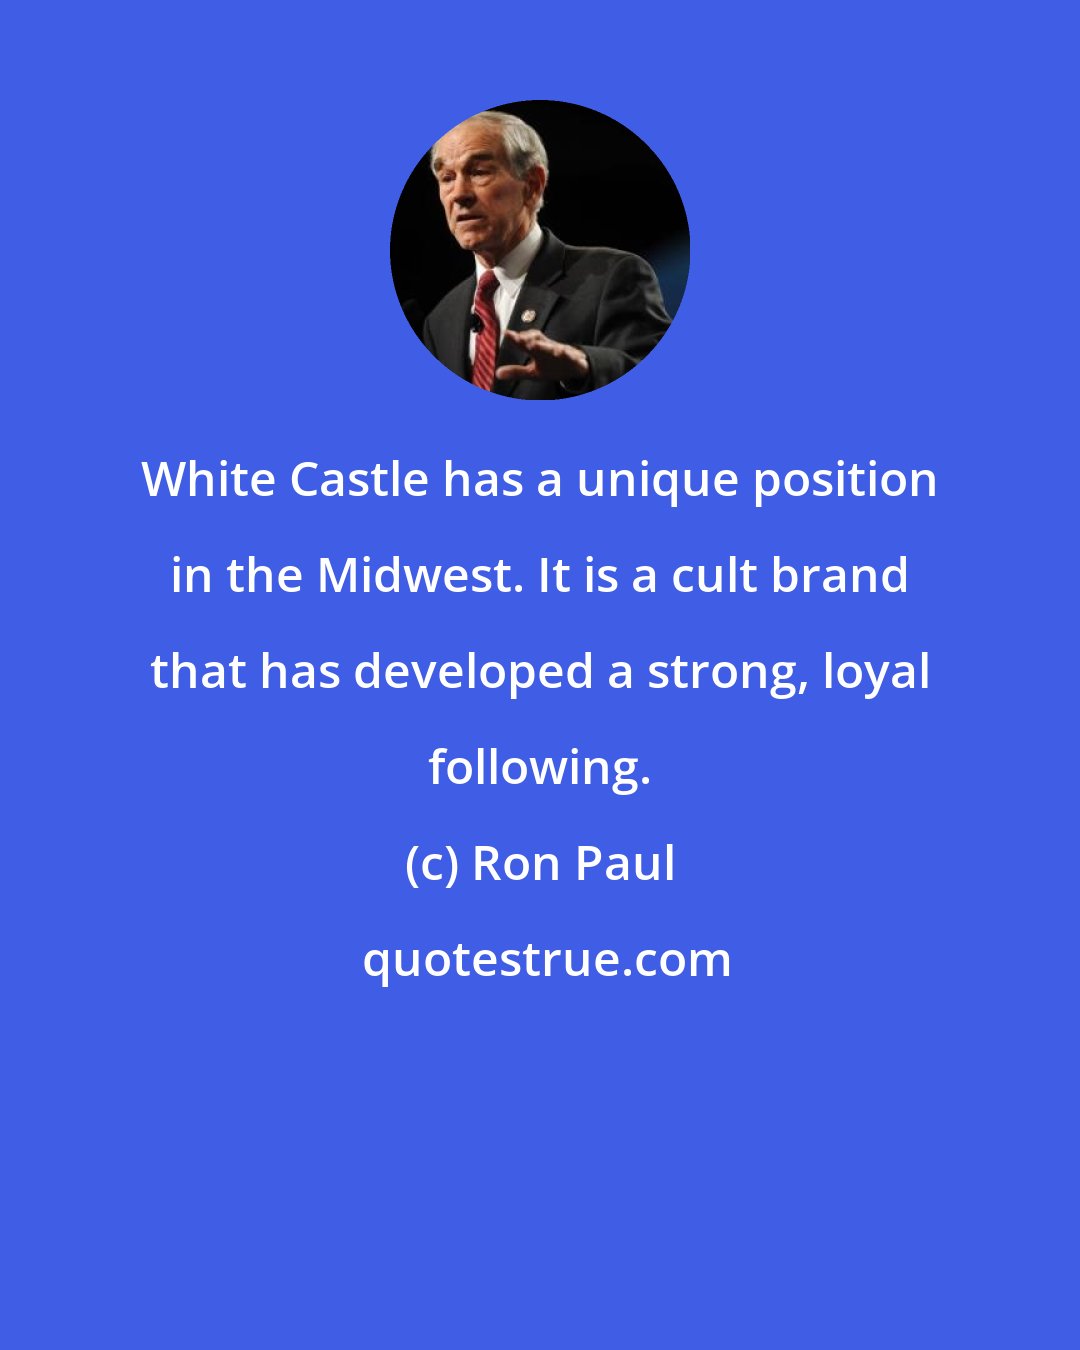 Ron Paul: White Castle has a unique position in the Midwest. It is a cult brand that has developed a strong, loyal following.